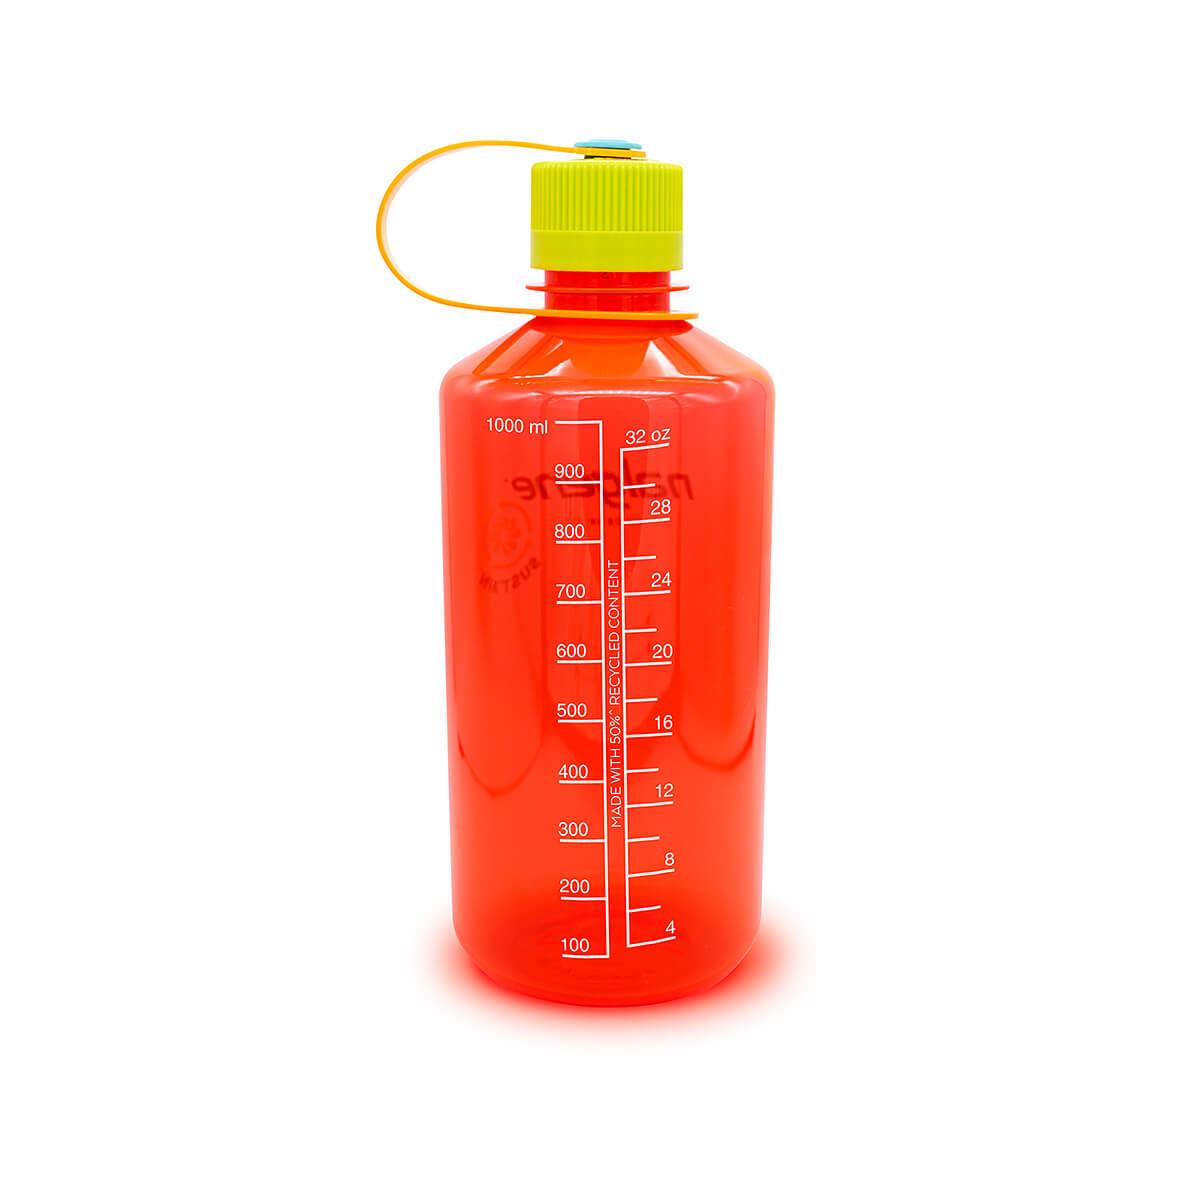 32 Oz Narrow Mouth Water Bottle With Spout Lid